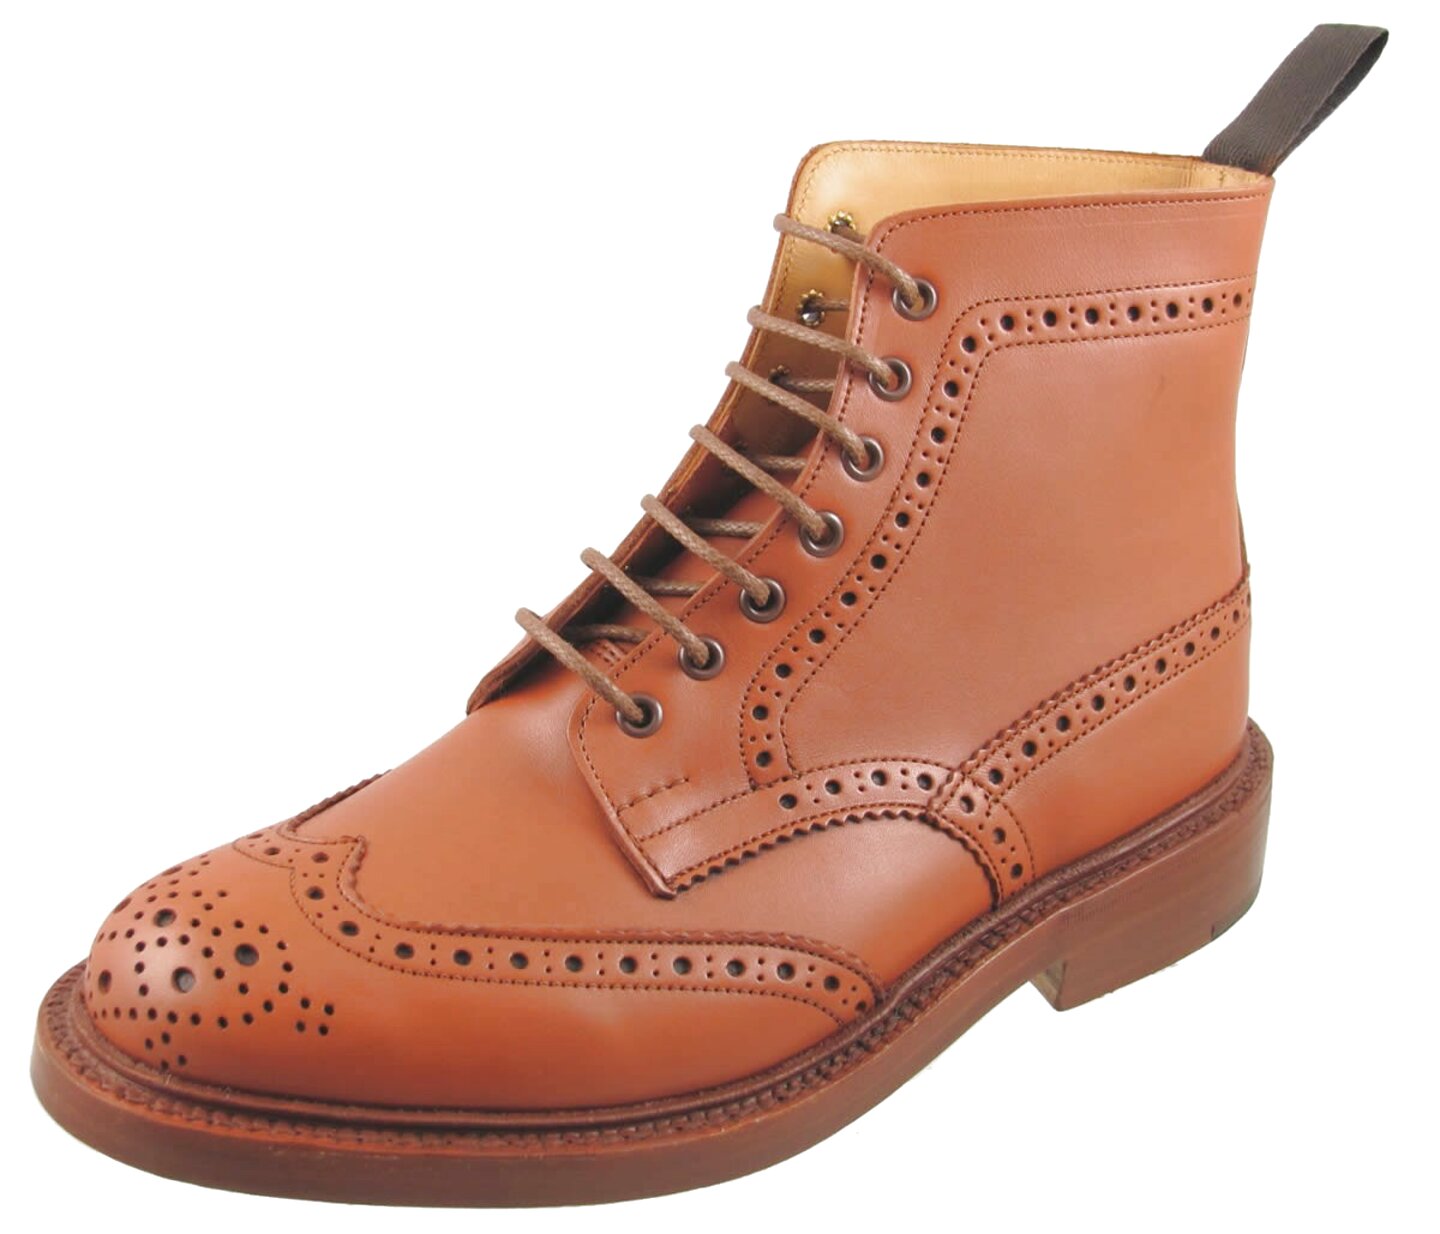 Trickers Boot for sale in UK | 59 used Trickers Boots